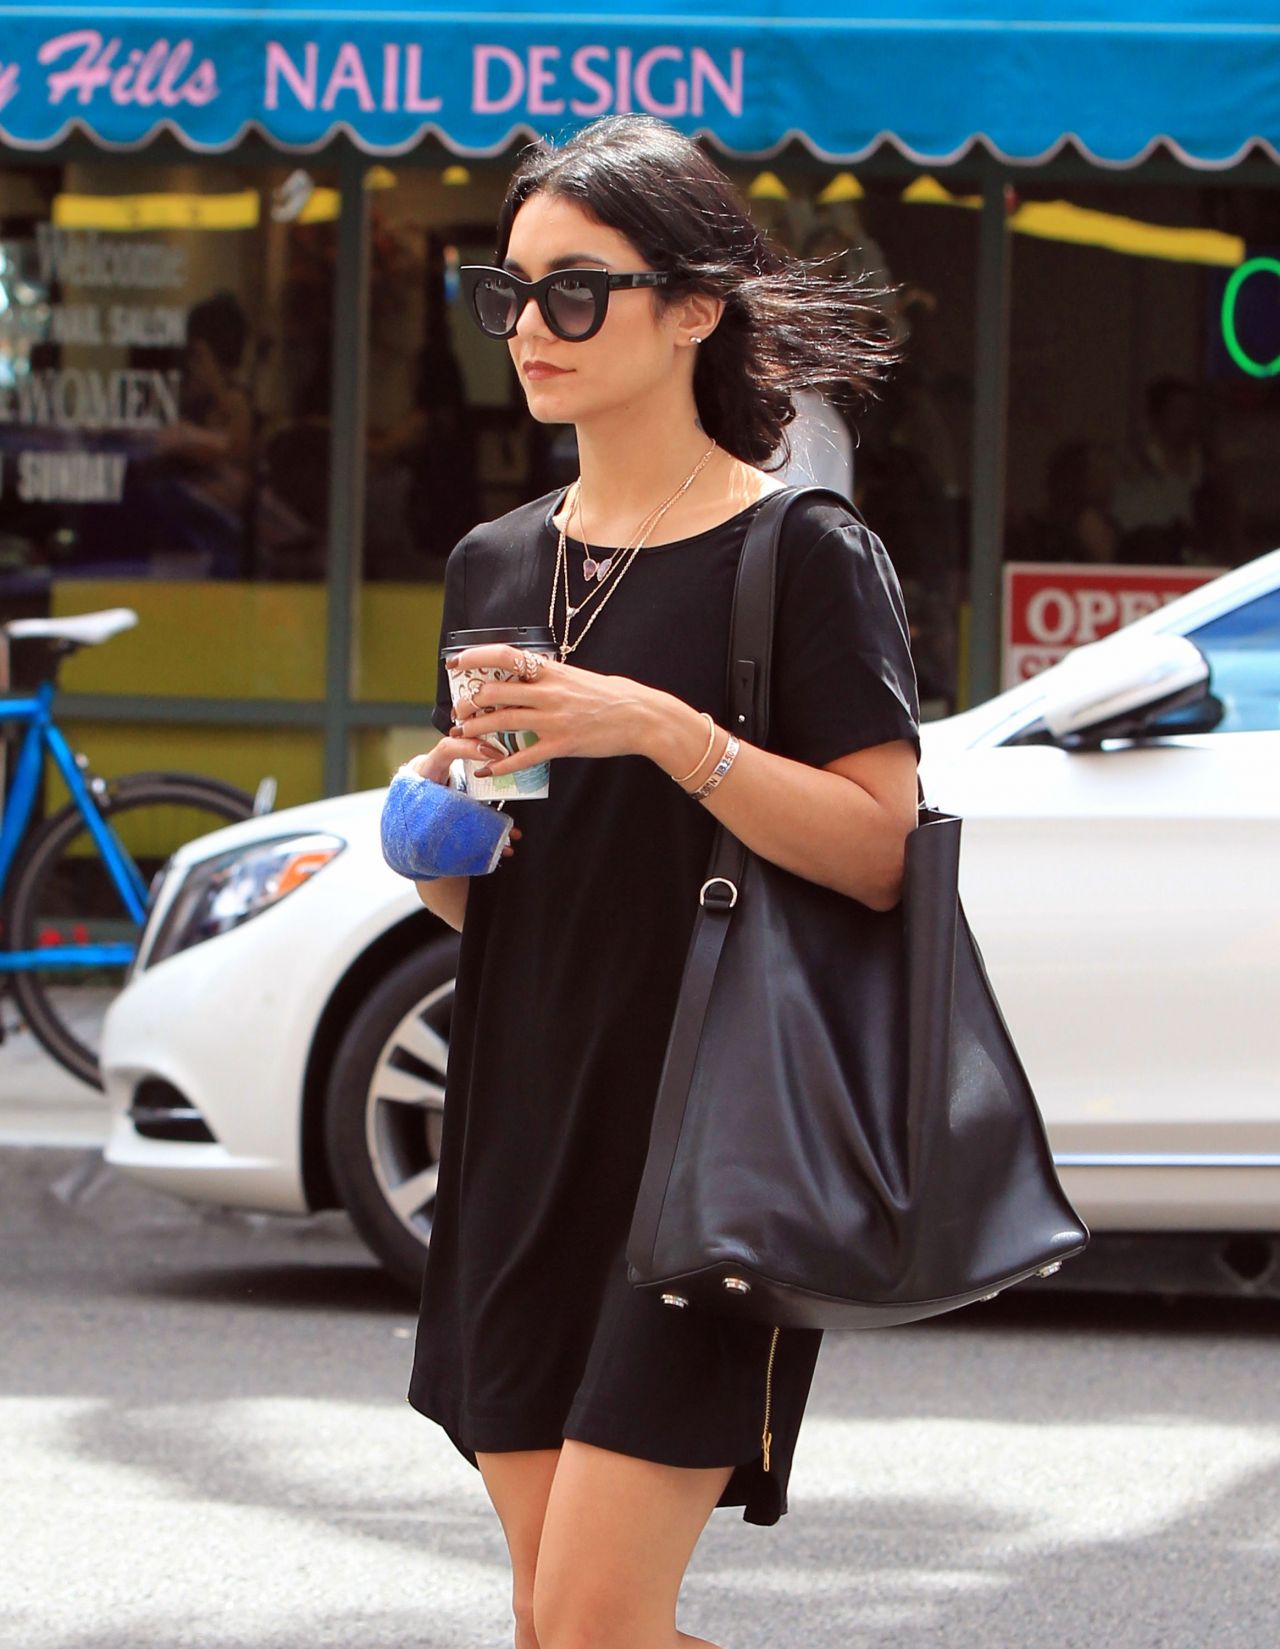 Vanessa Hudgens Shops at Rite Aid in Beverly Hills, August 2015 ...